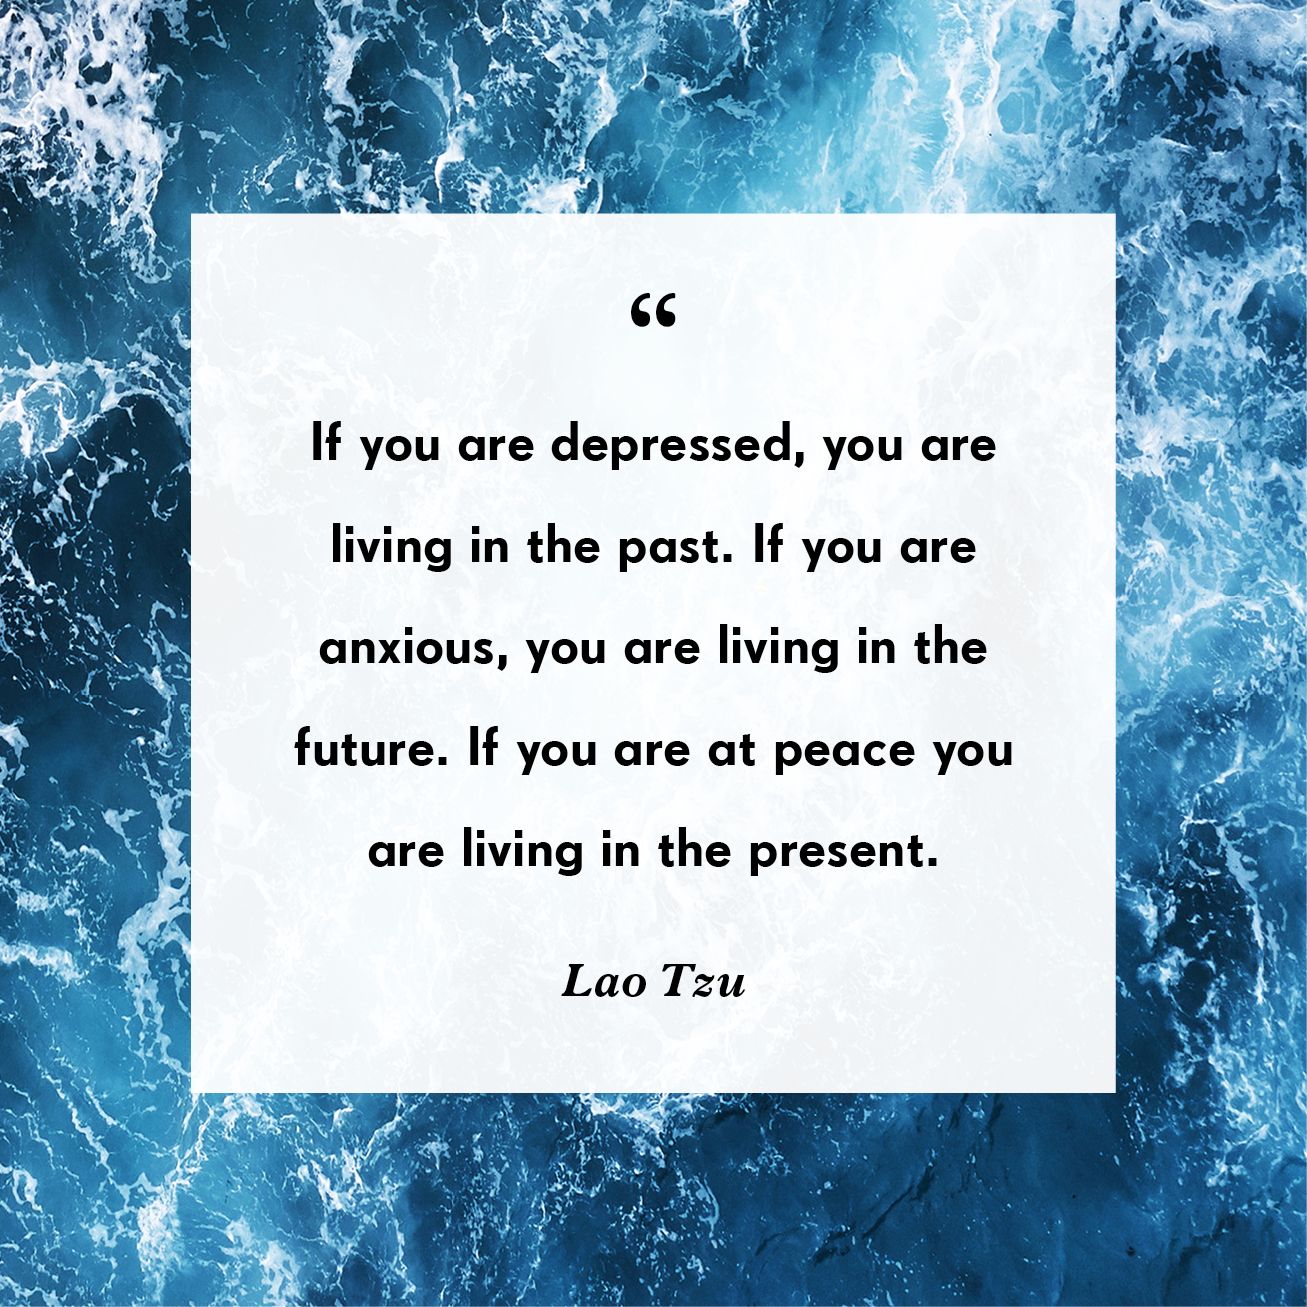 Quotes About Depression And Anxiety